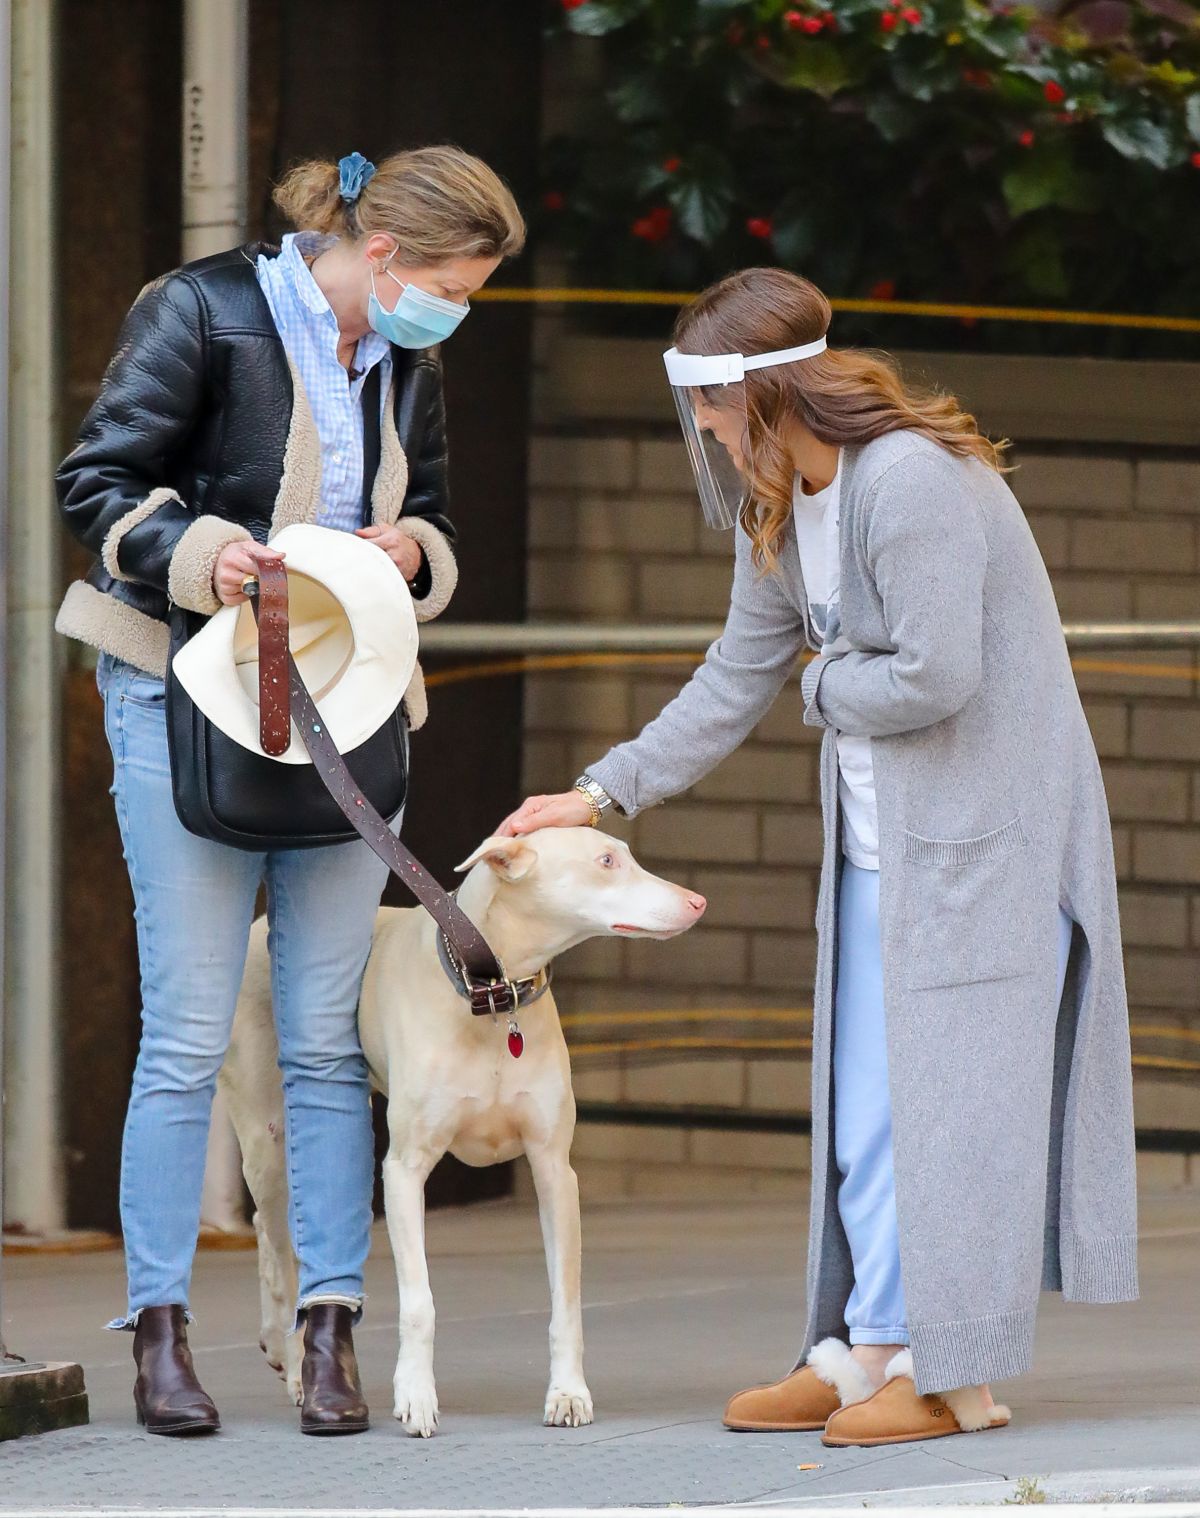 Drew Barrymore Comes to the Rescue of a New Yorker 2020/09/22 12